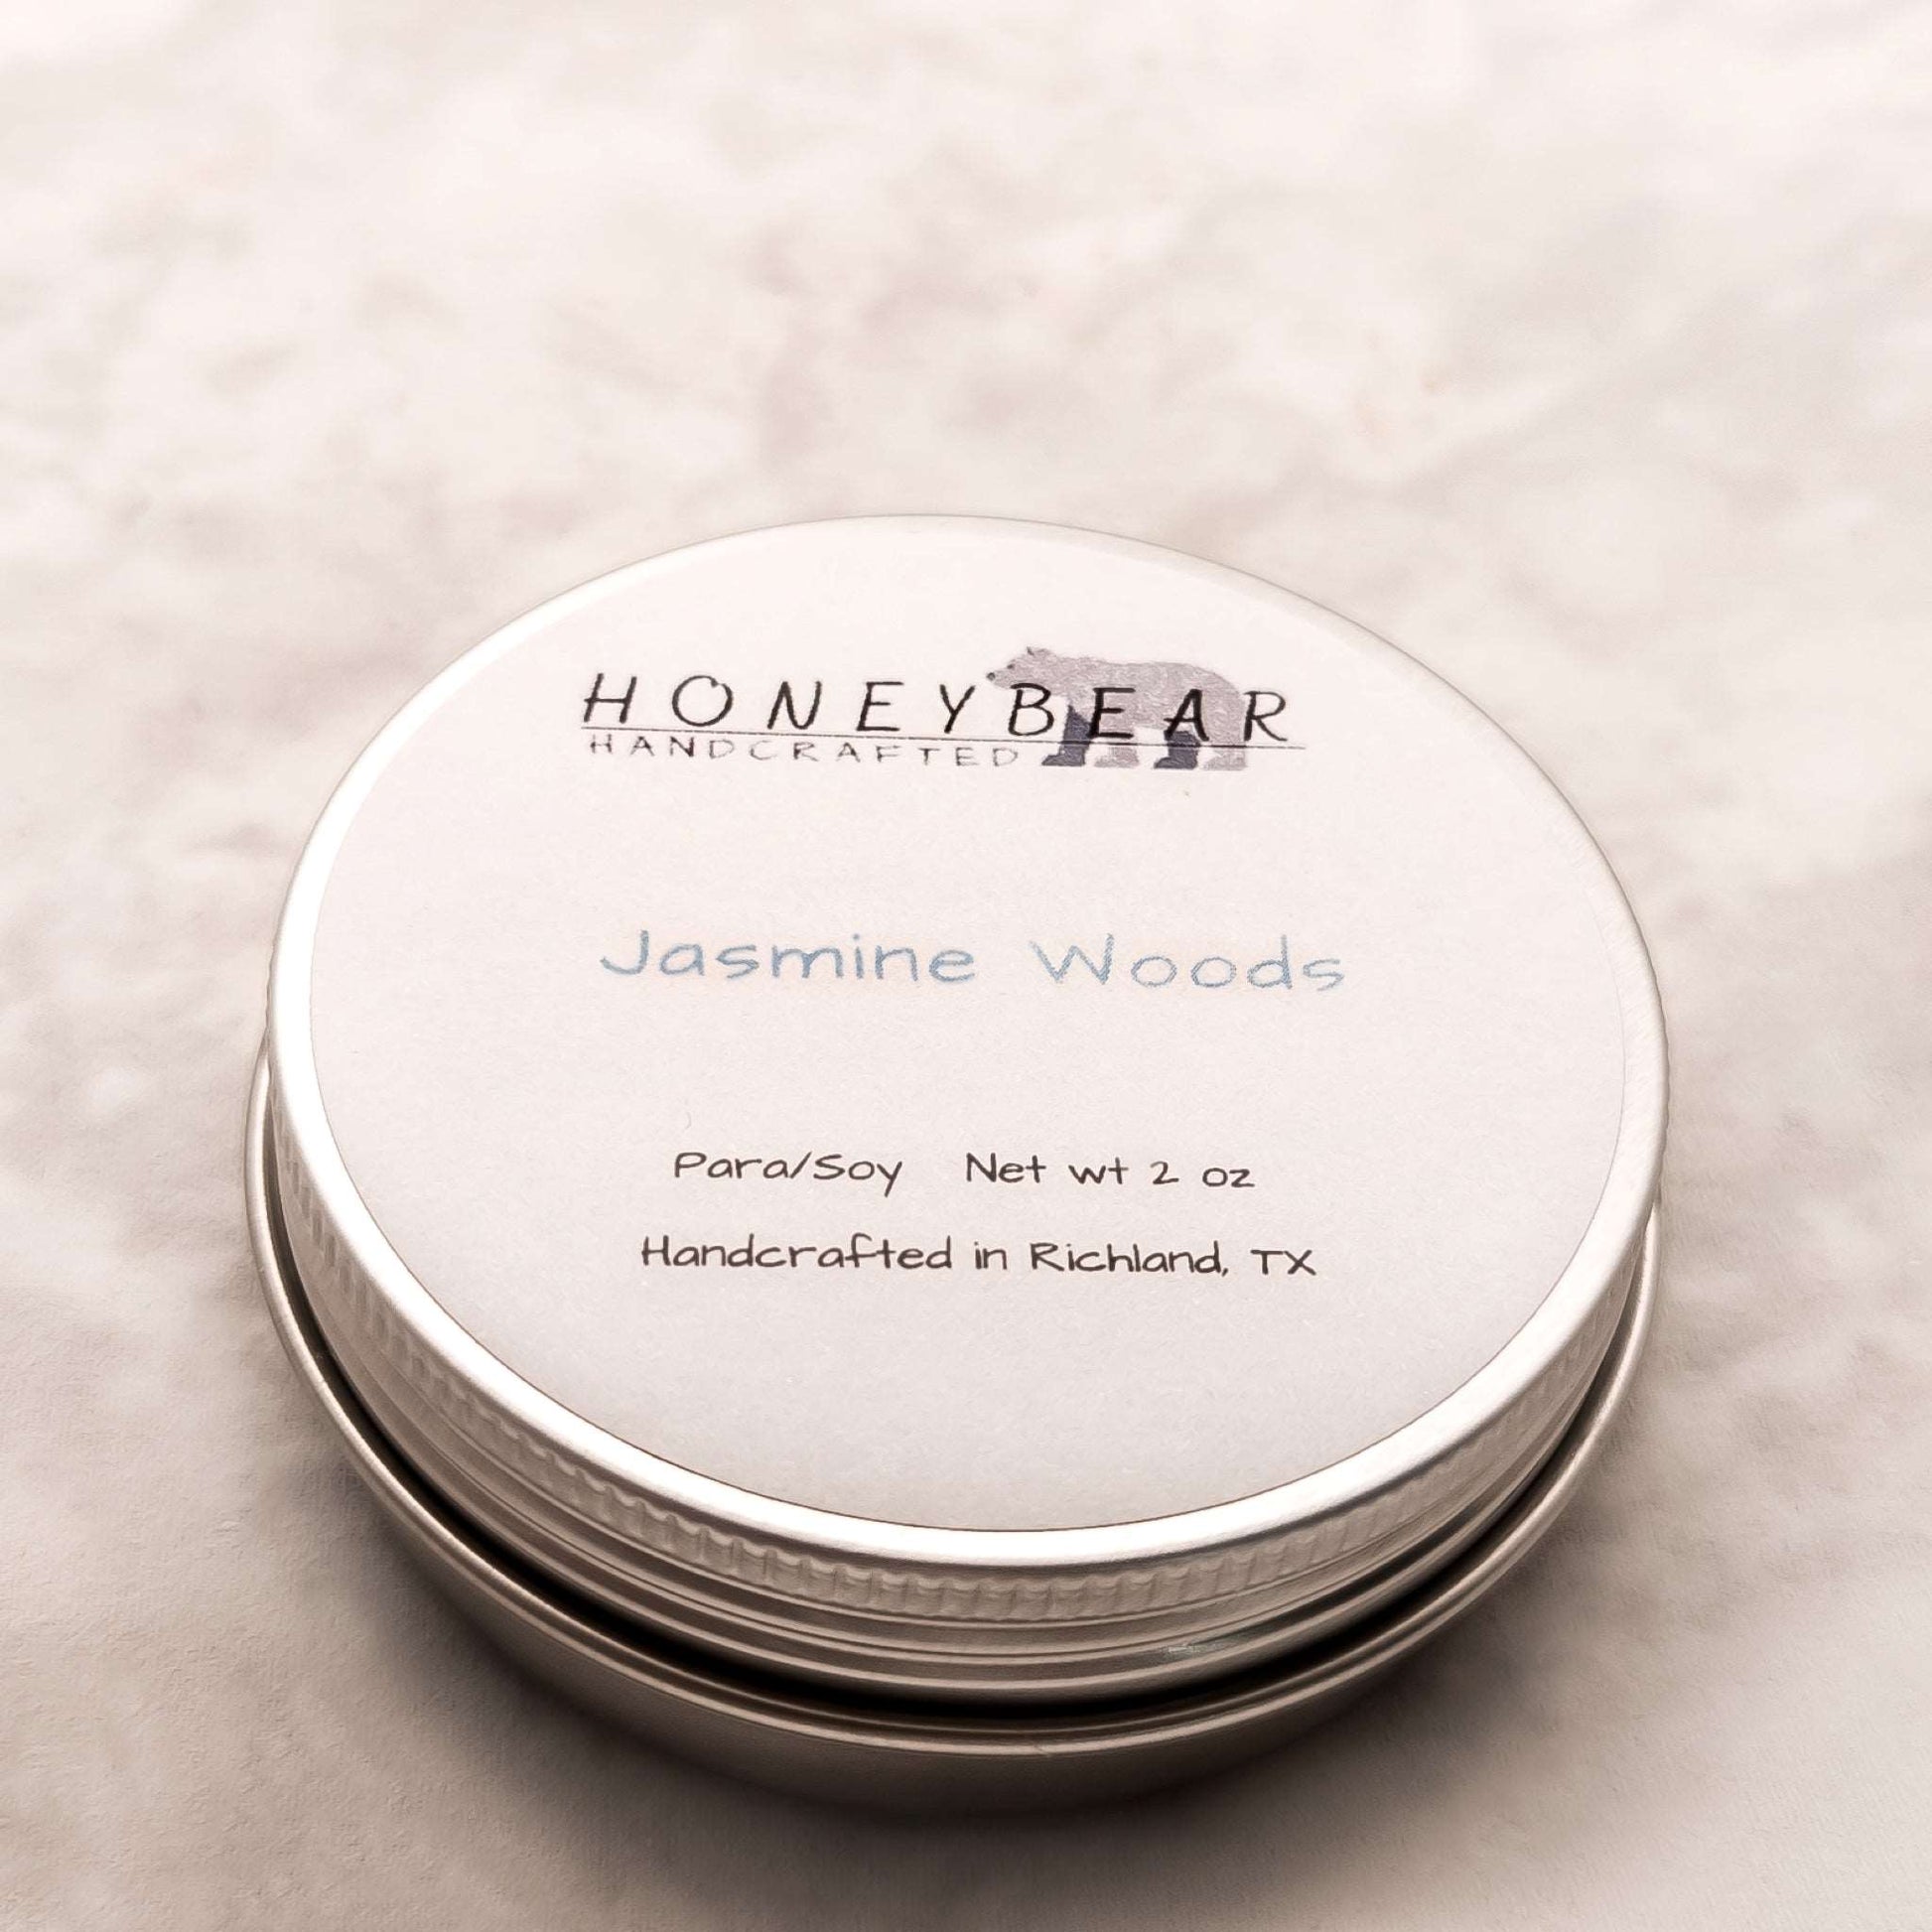 image of 2 oz travel or sample size candle labeled Jasmine Woods on a white background